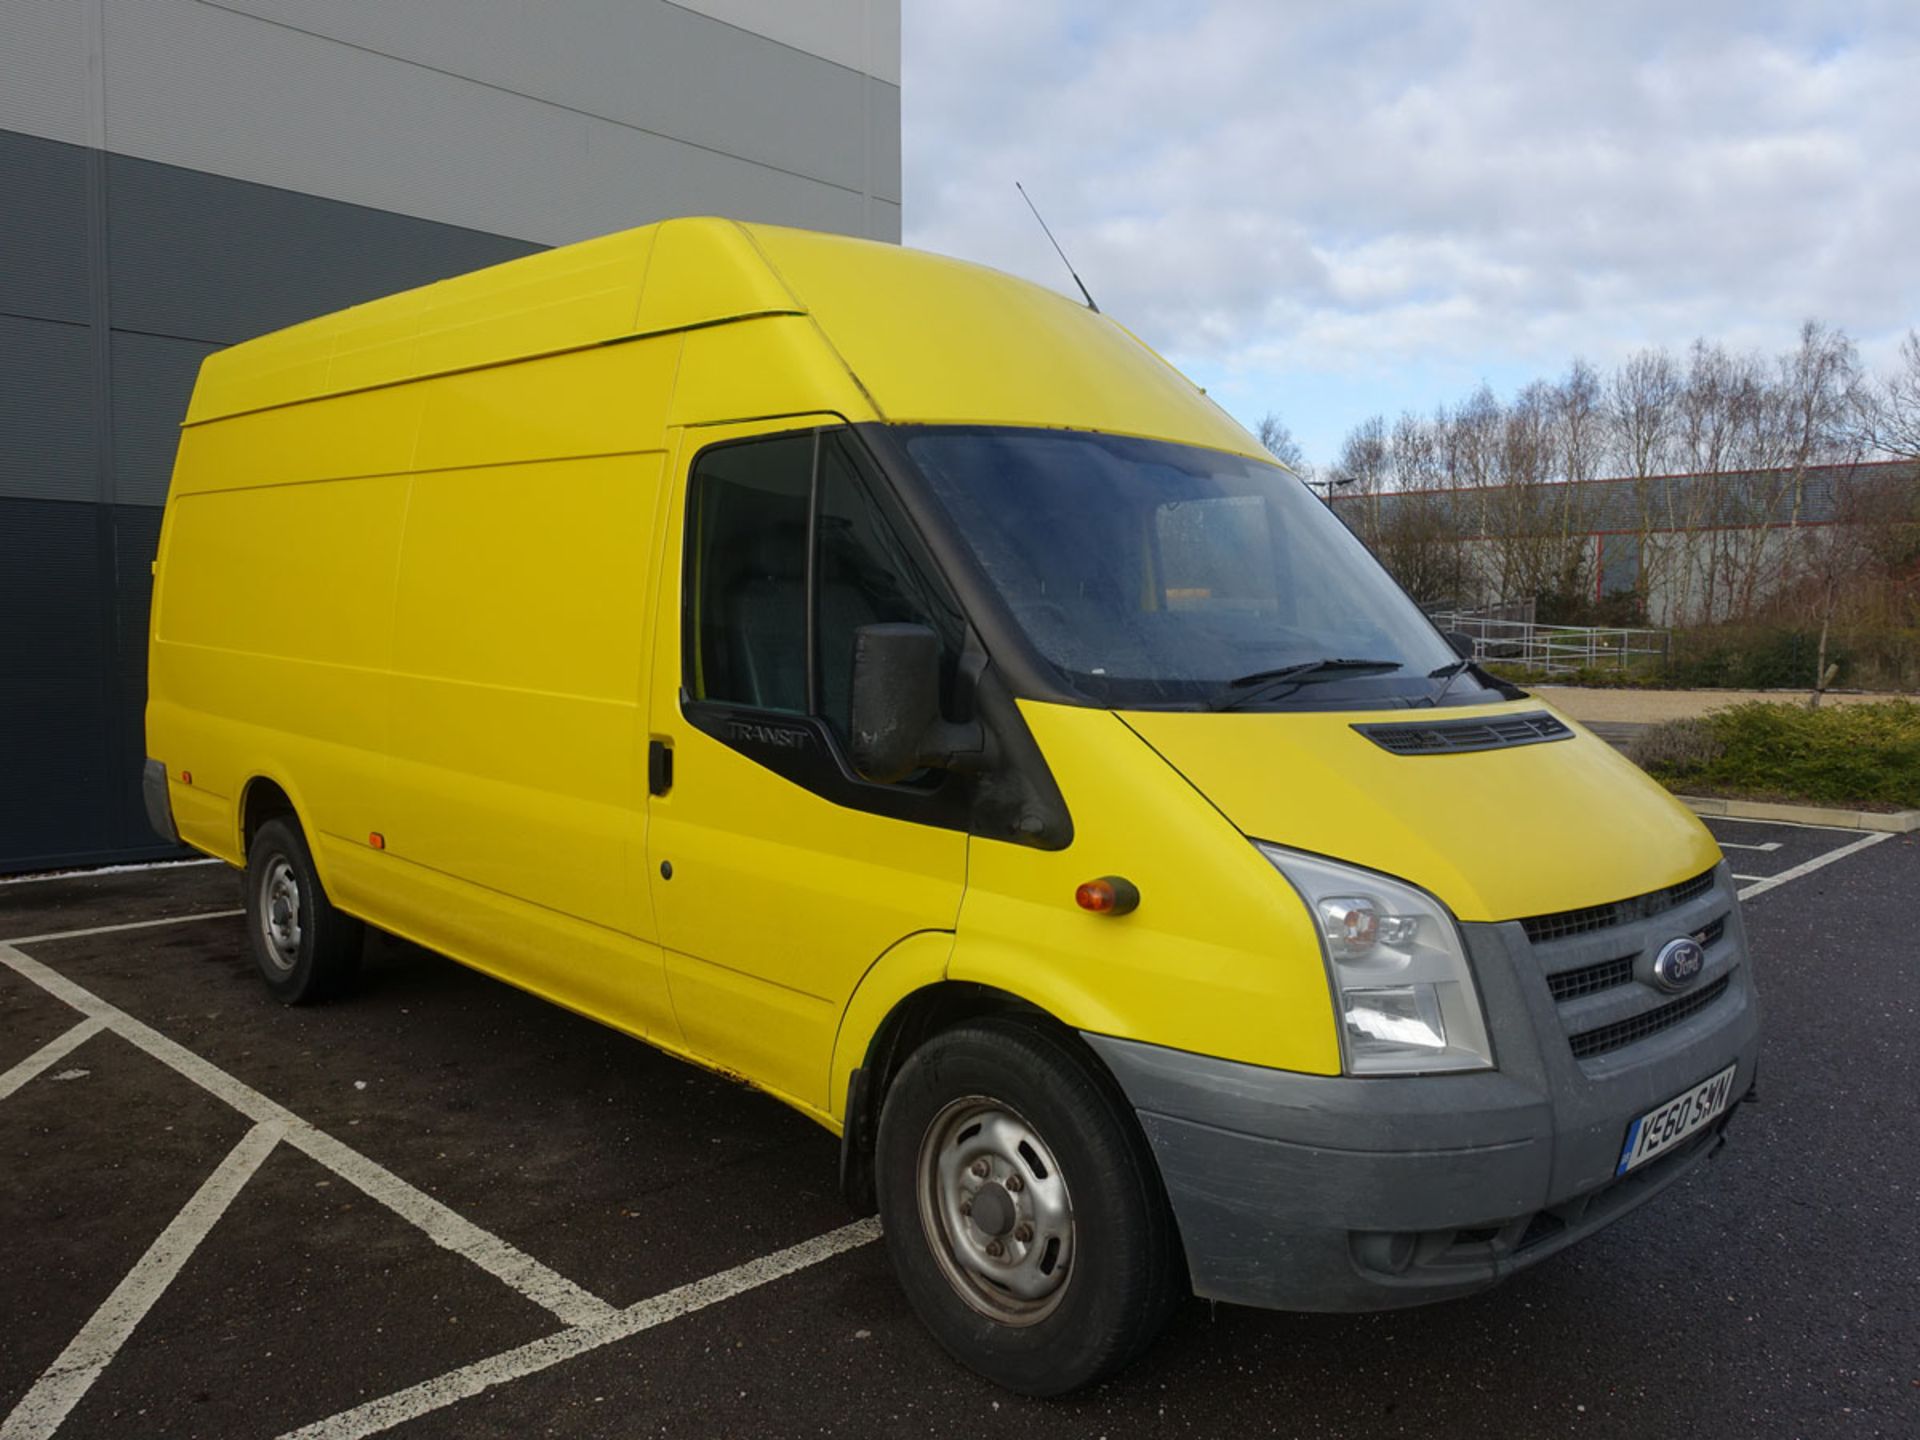 2010 Ford Transit Panel Van in yellow, 2402cc, key and V5 present, first registered 26,11,2010, 3 - Image 2 of 7